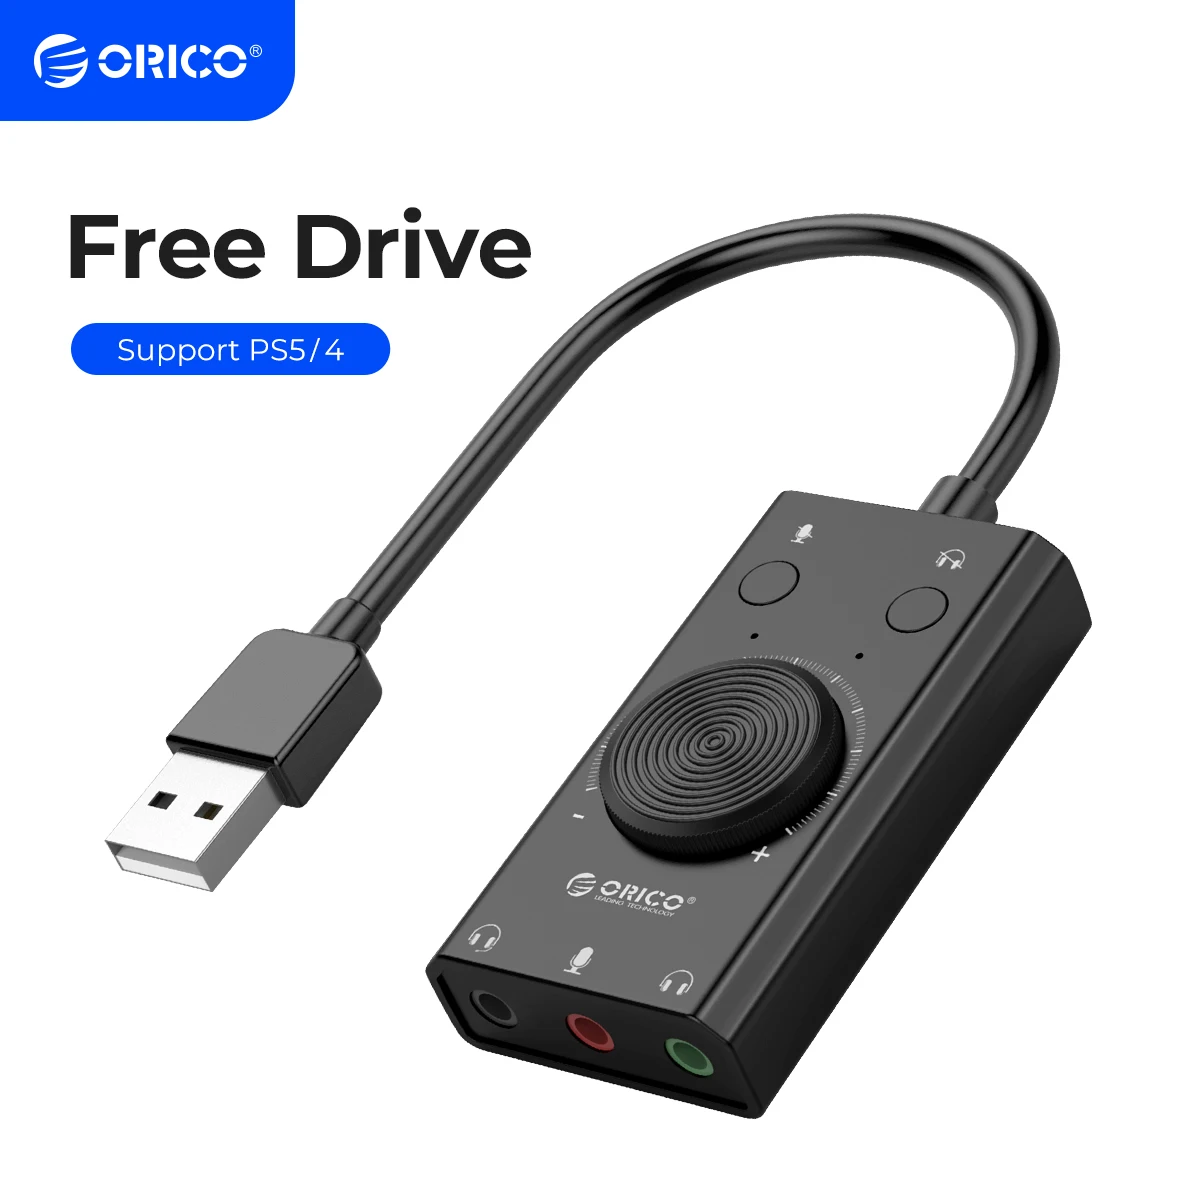 ORICO External USB Sound Card Stereo Mic Speaker Headset Audio Jack 3.5mm Cable Adapter Mute Switch Volume Adjustment Free Drive